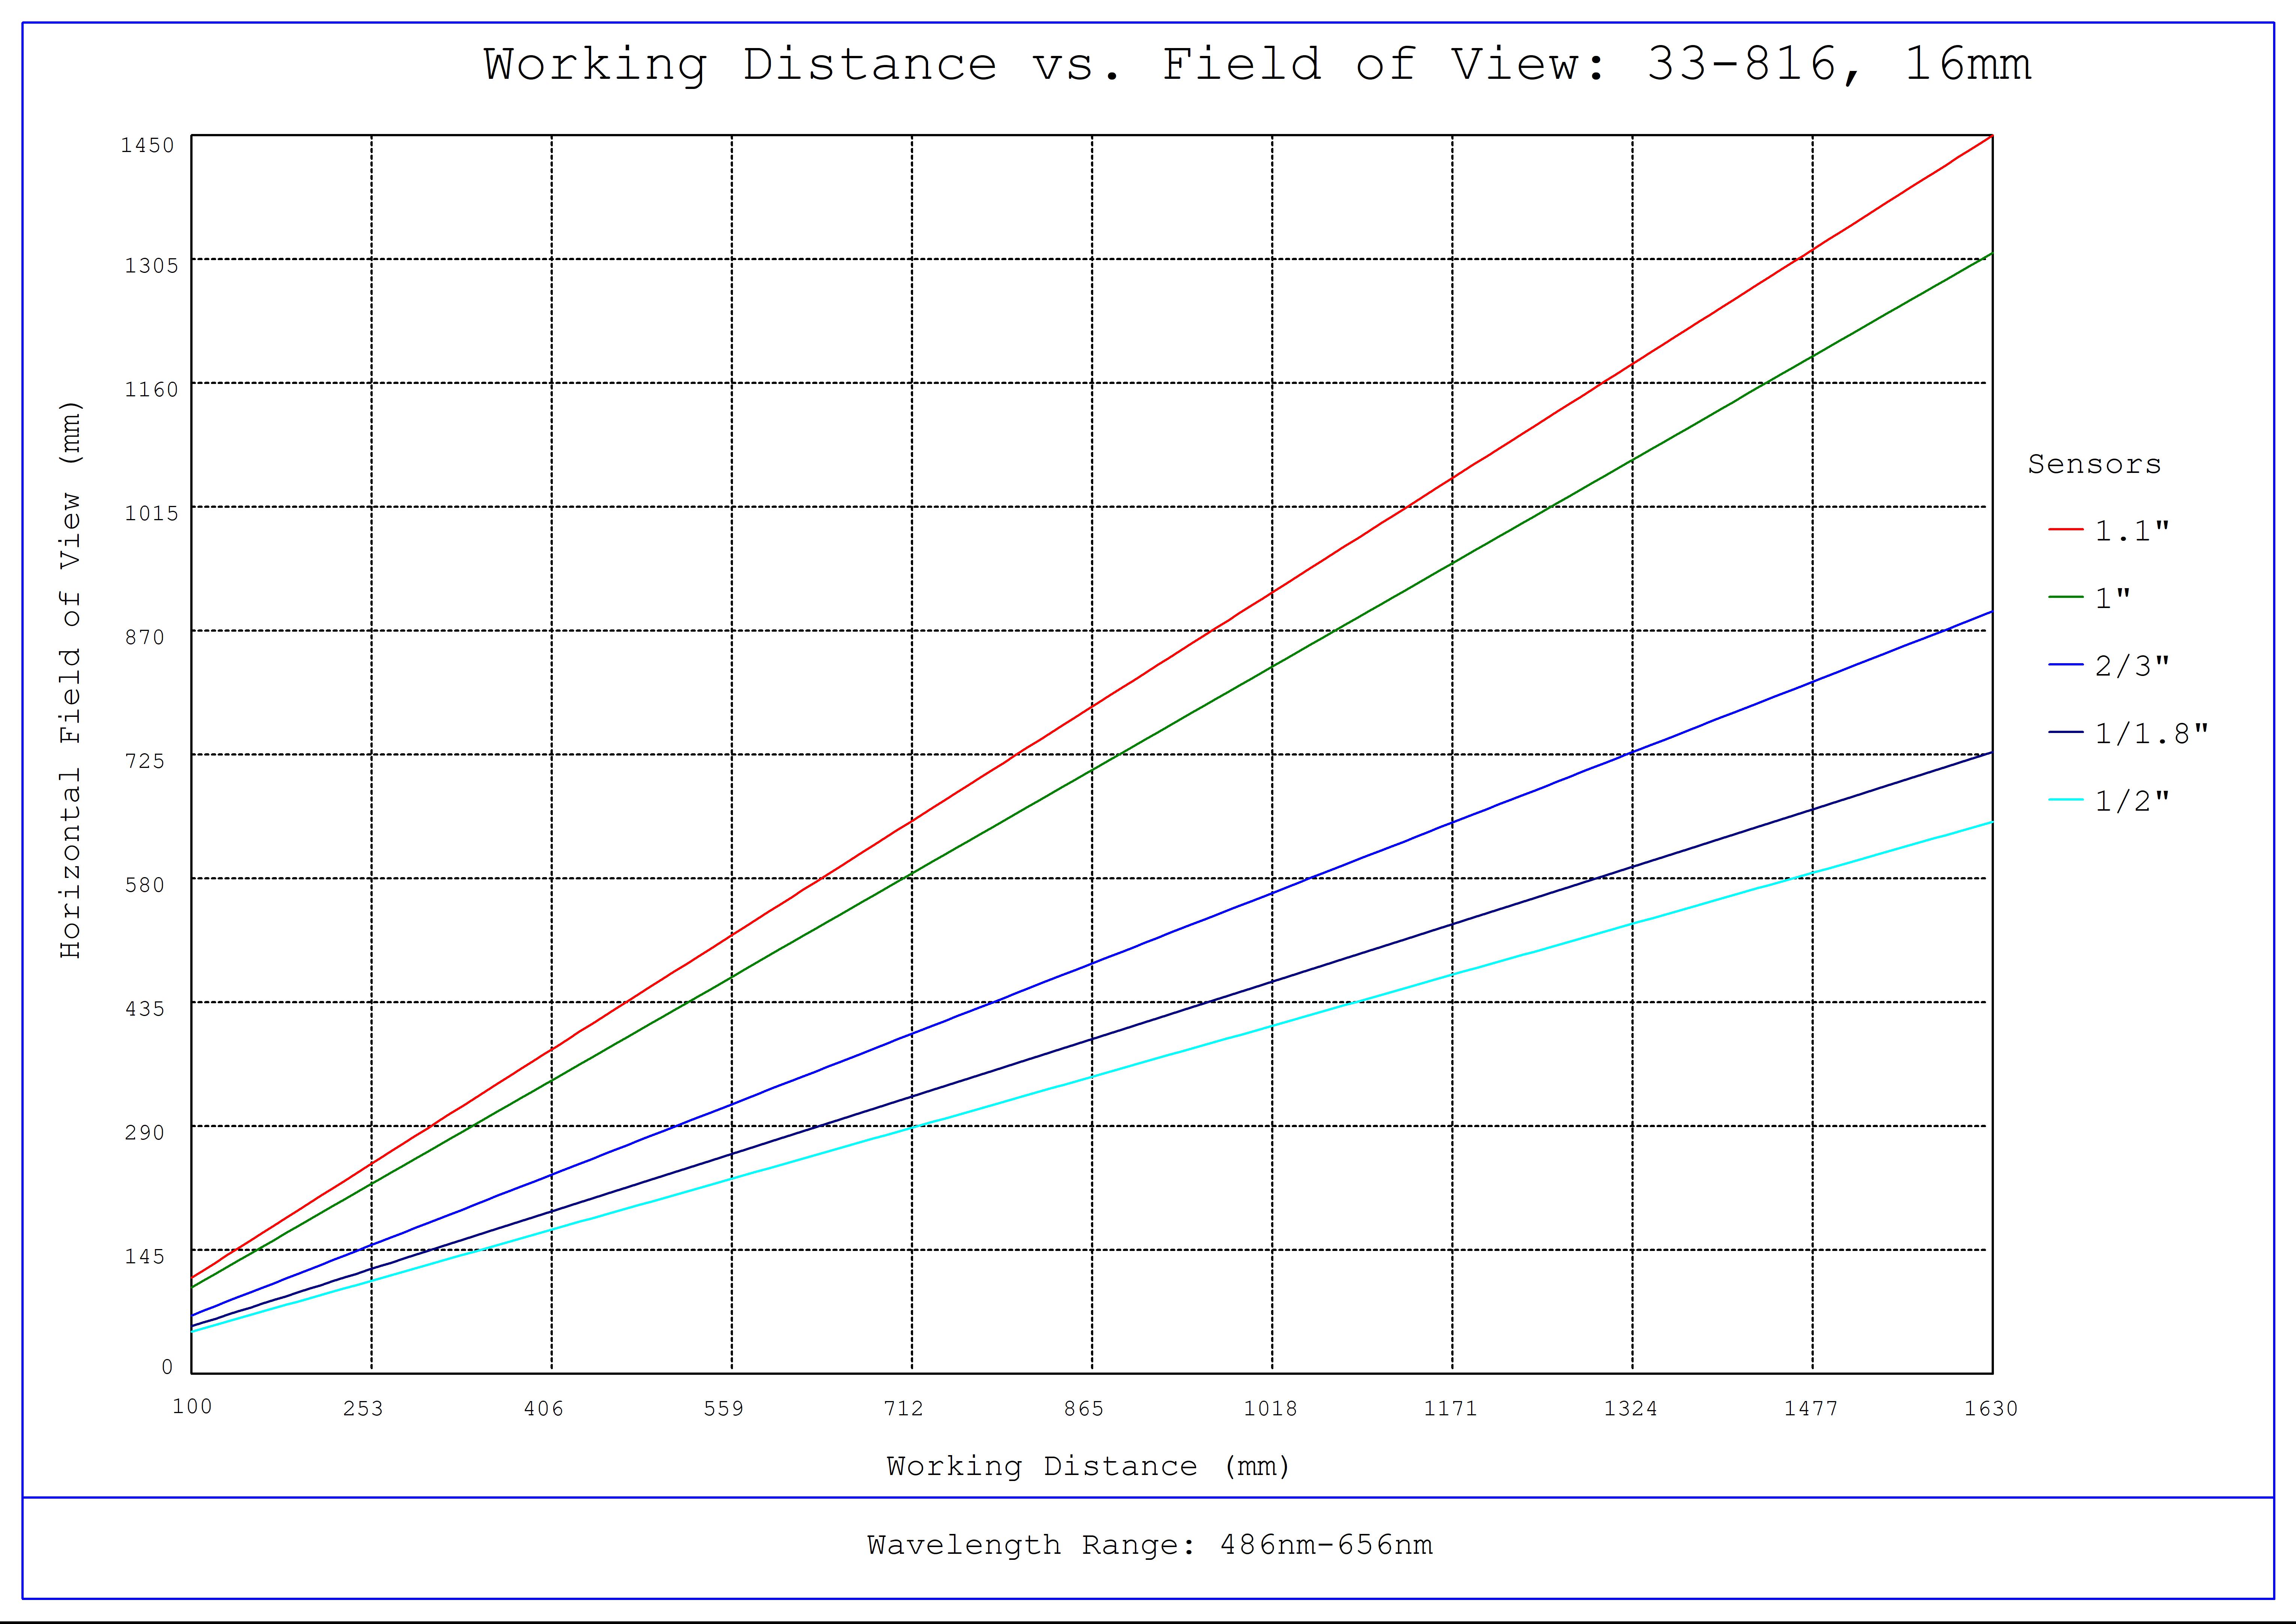 #33-816, 16mm f/4, HPi Series Fixed Focal Length Lens, Working Distance versus Field of View Plot